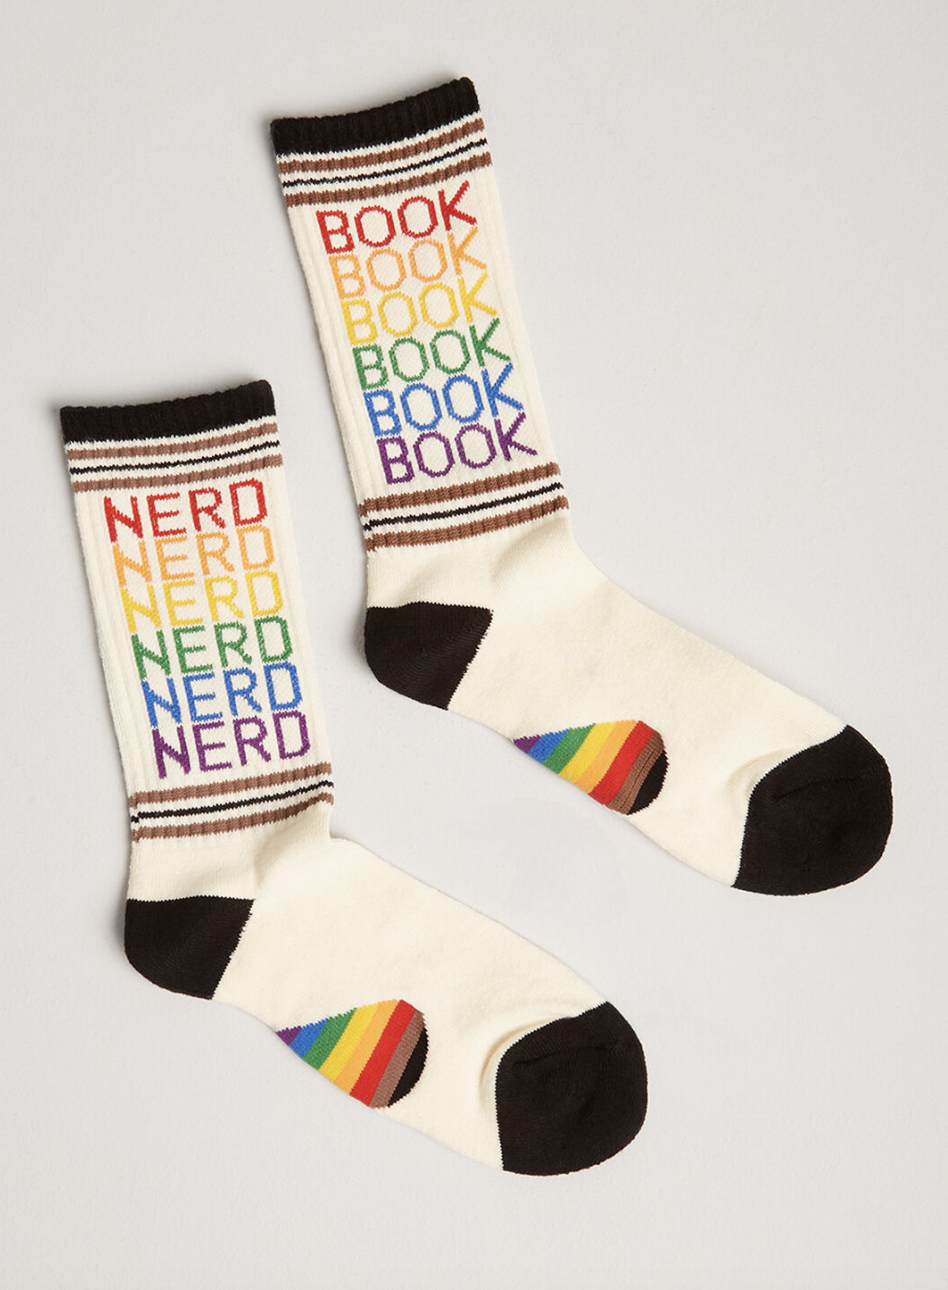 A pair of white socks with black and rainbow detailing, one of which says &quot;book&quot; six times and the other that says &quot;nerd&quot; six times